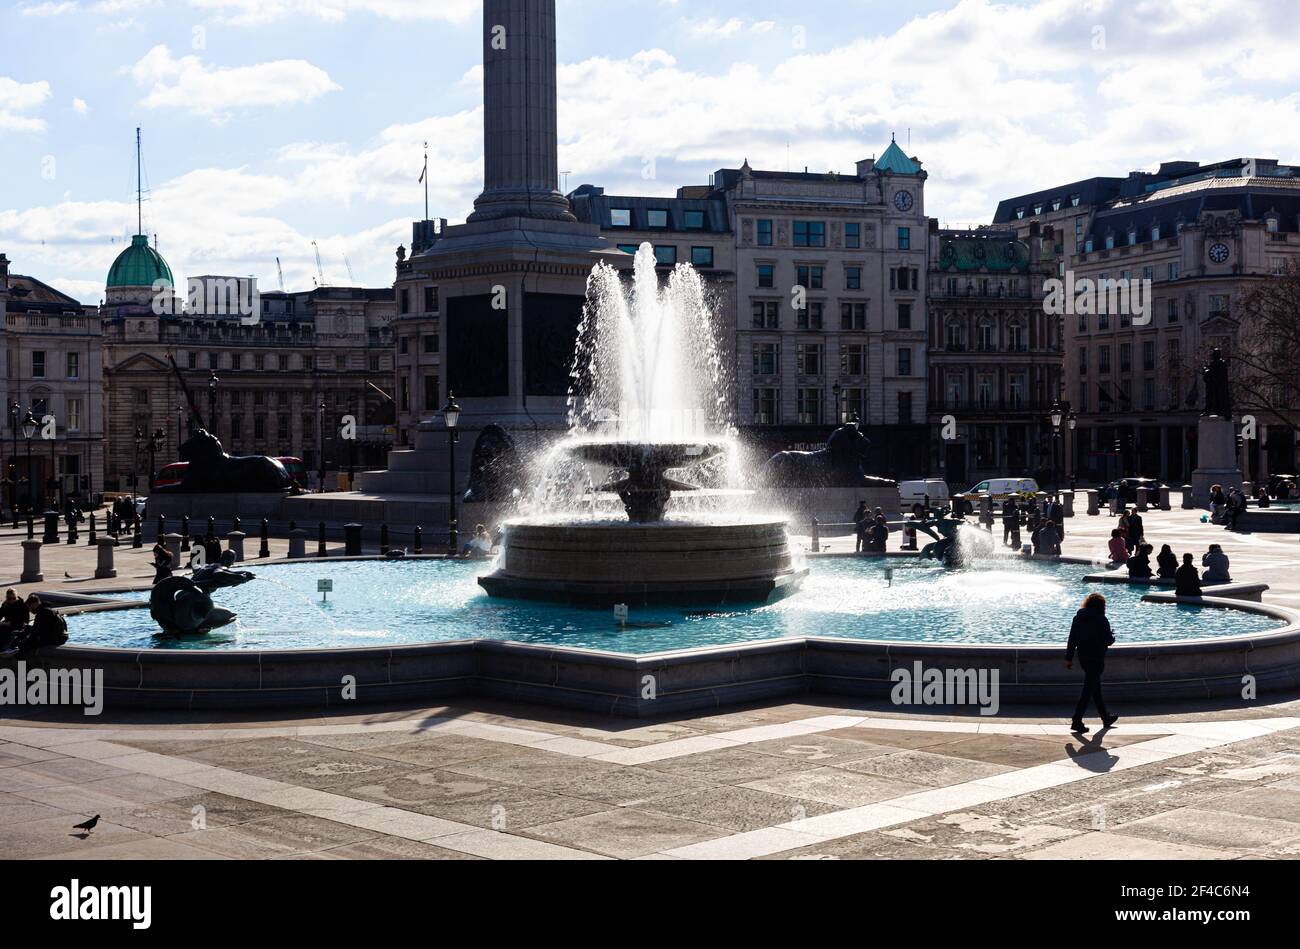 One of Trafalgar Square water fountains, Central London, England, UK. Stock Photo